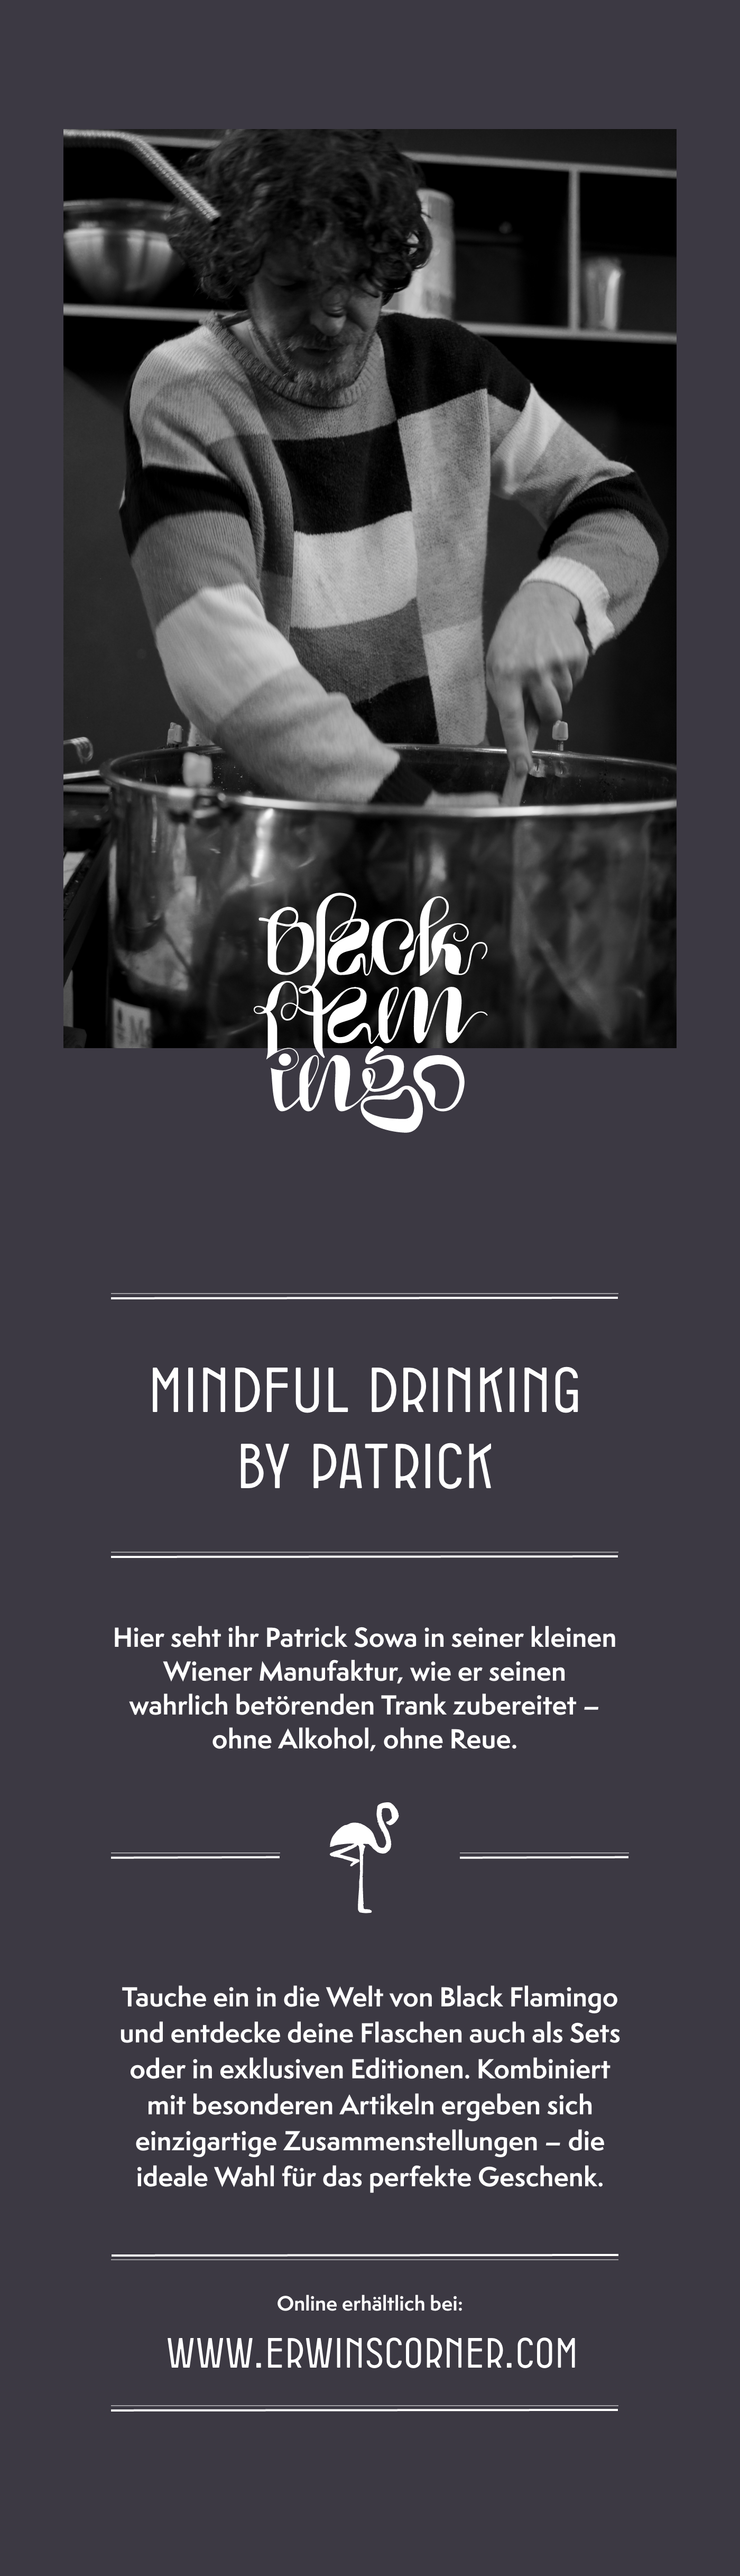 Mindful Drinking with Patrick!